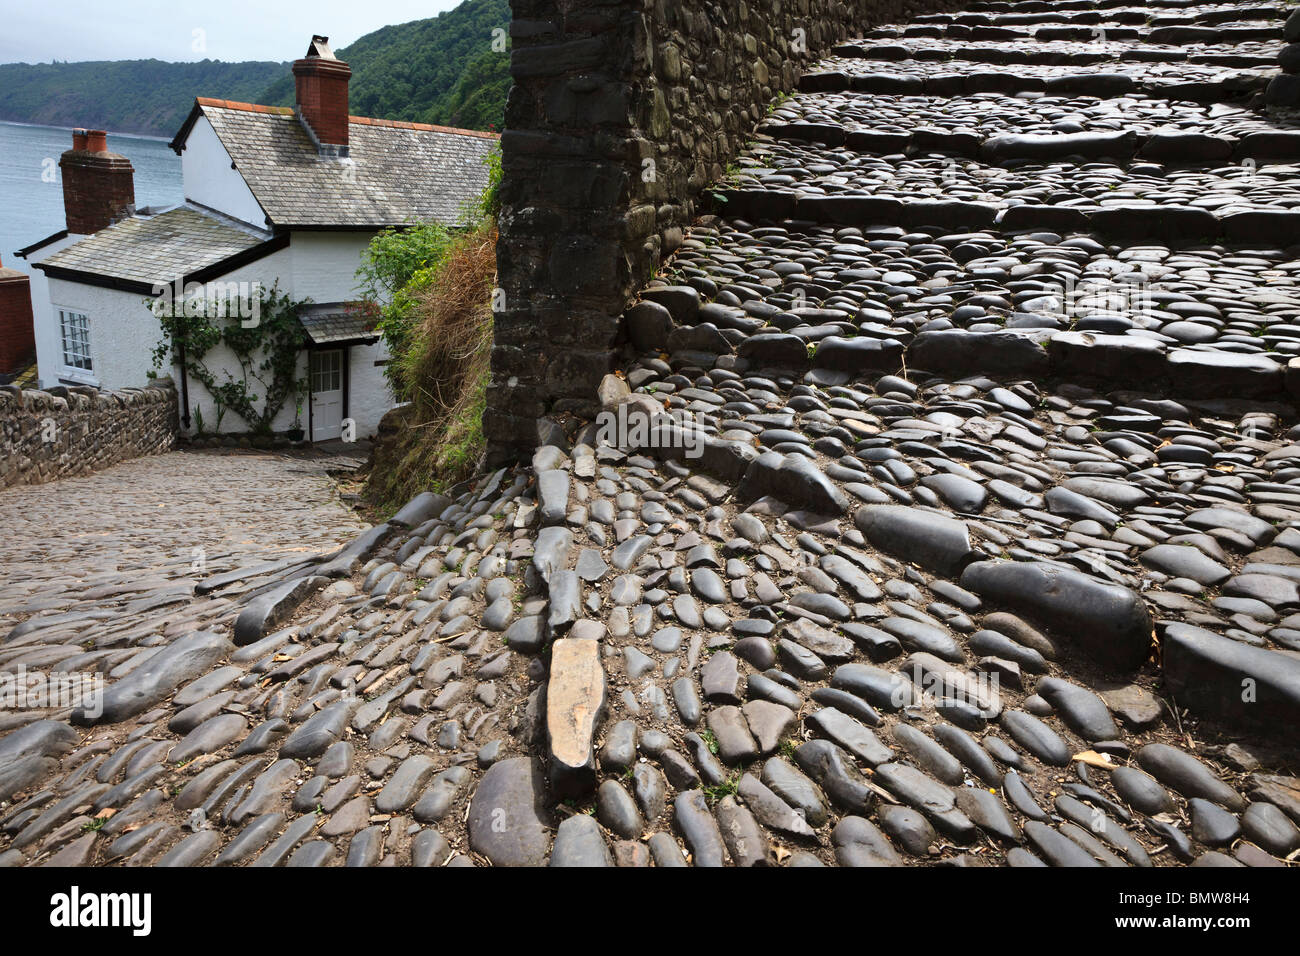 The steep cobbled street at Clovelly, Devon, England. Stock Photo